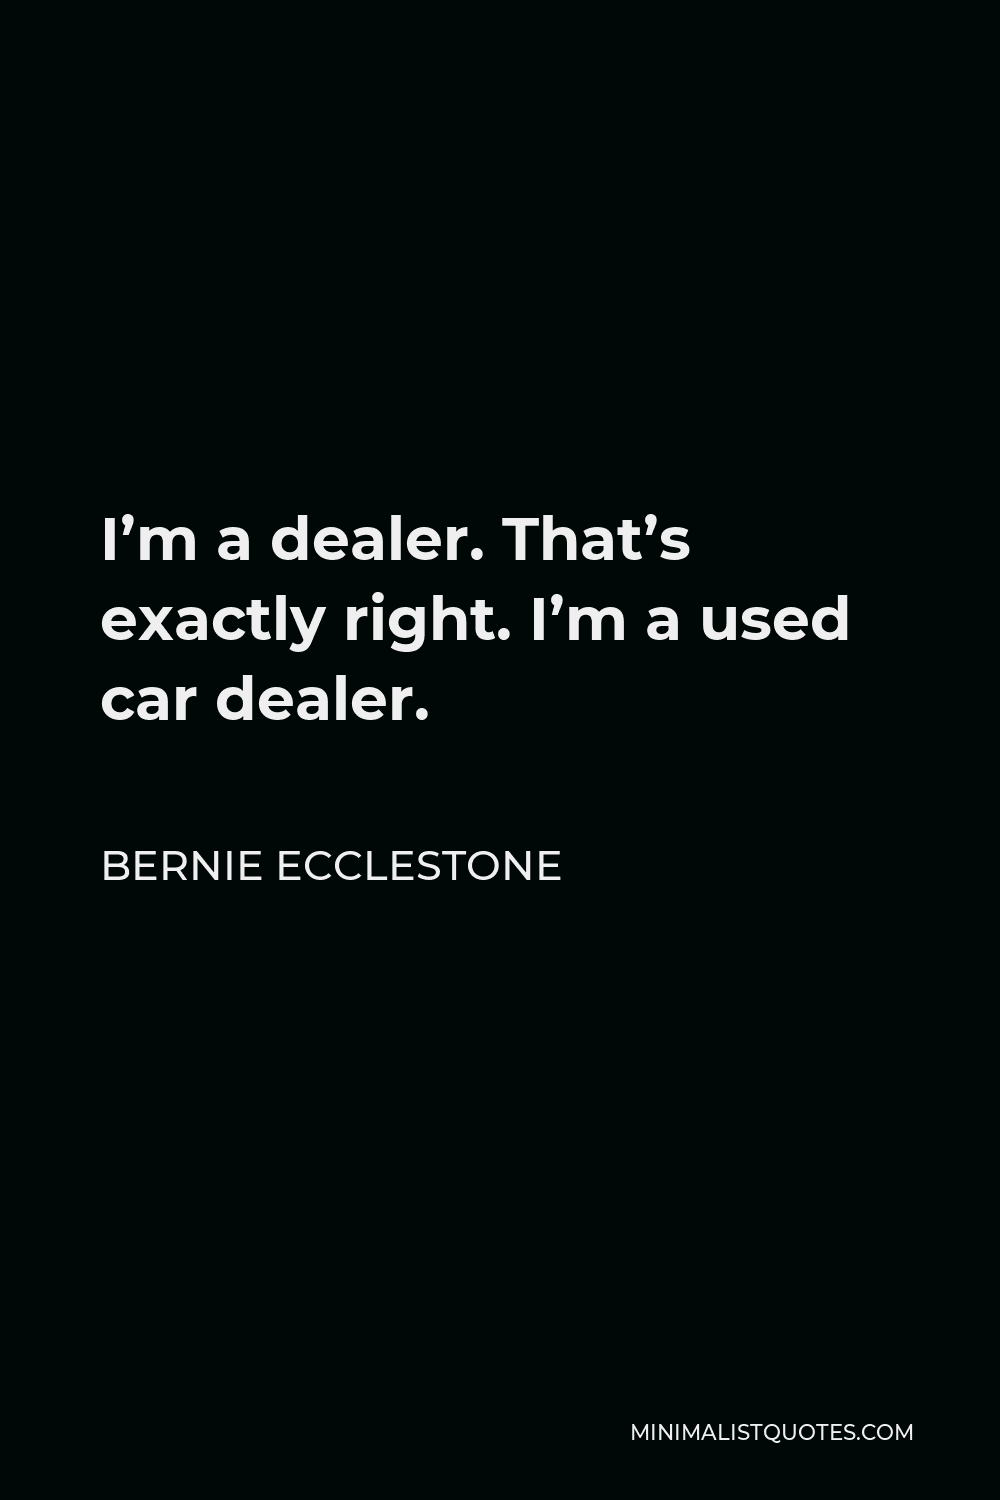 Bernie Ecclestone Quote - I’m a dealer. That’s exactly right. I’m a used car dealer.